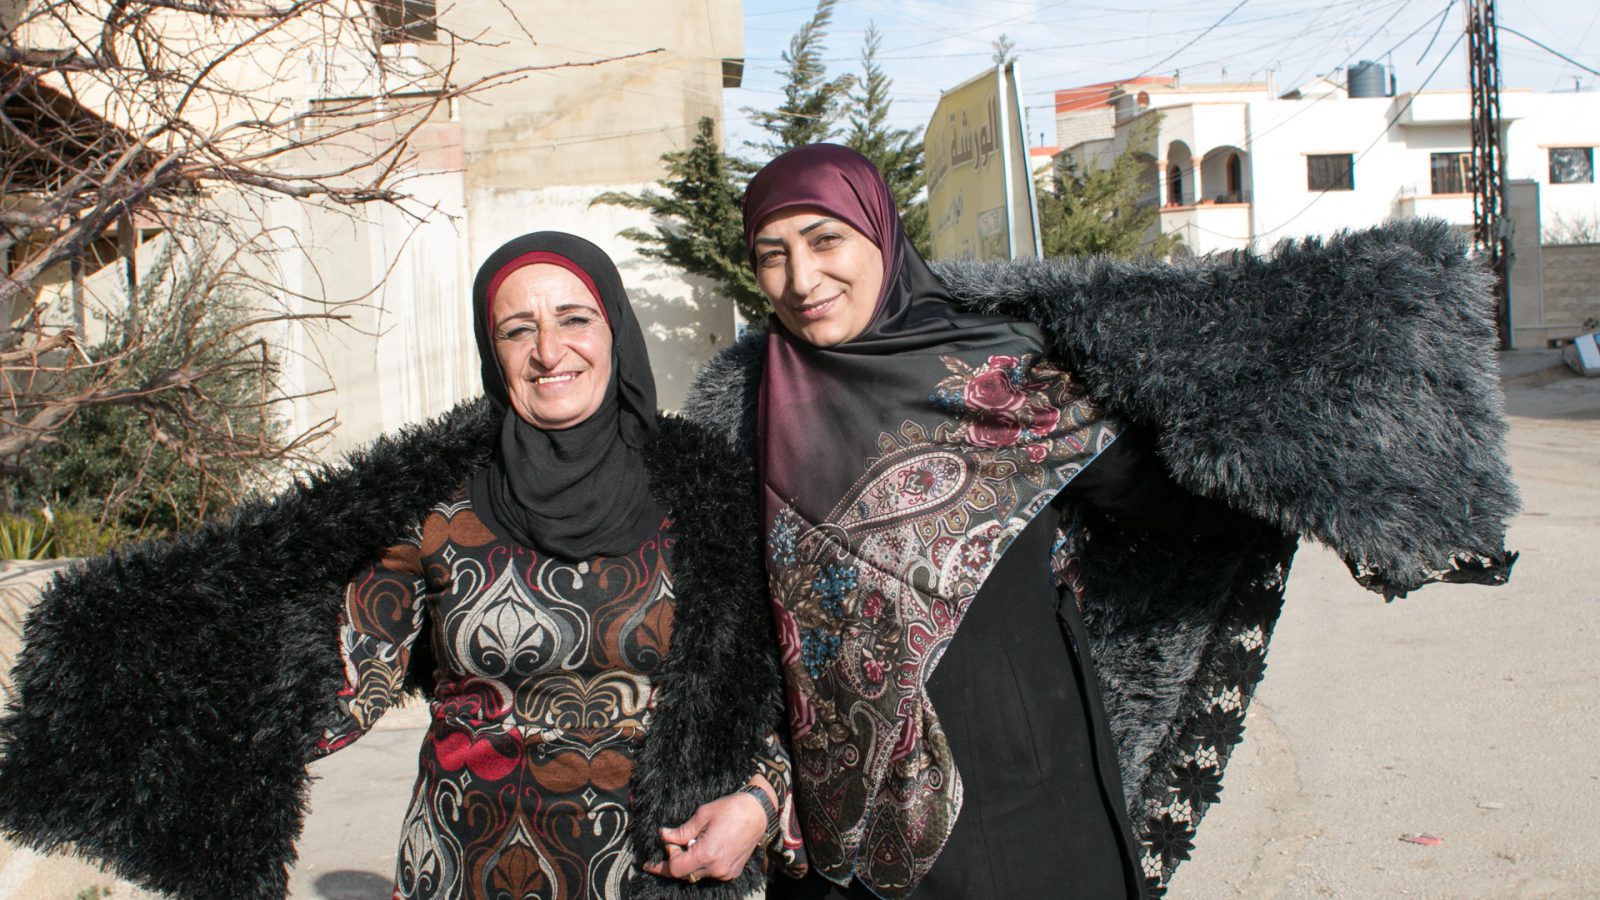 Souhayla and her neighbour both beneficiaries of the EU-funded Dawric project, pose with their creations